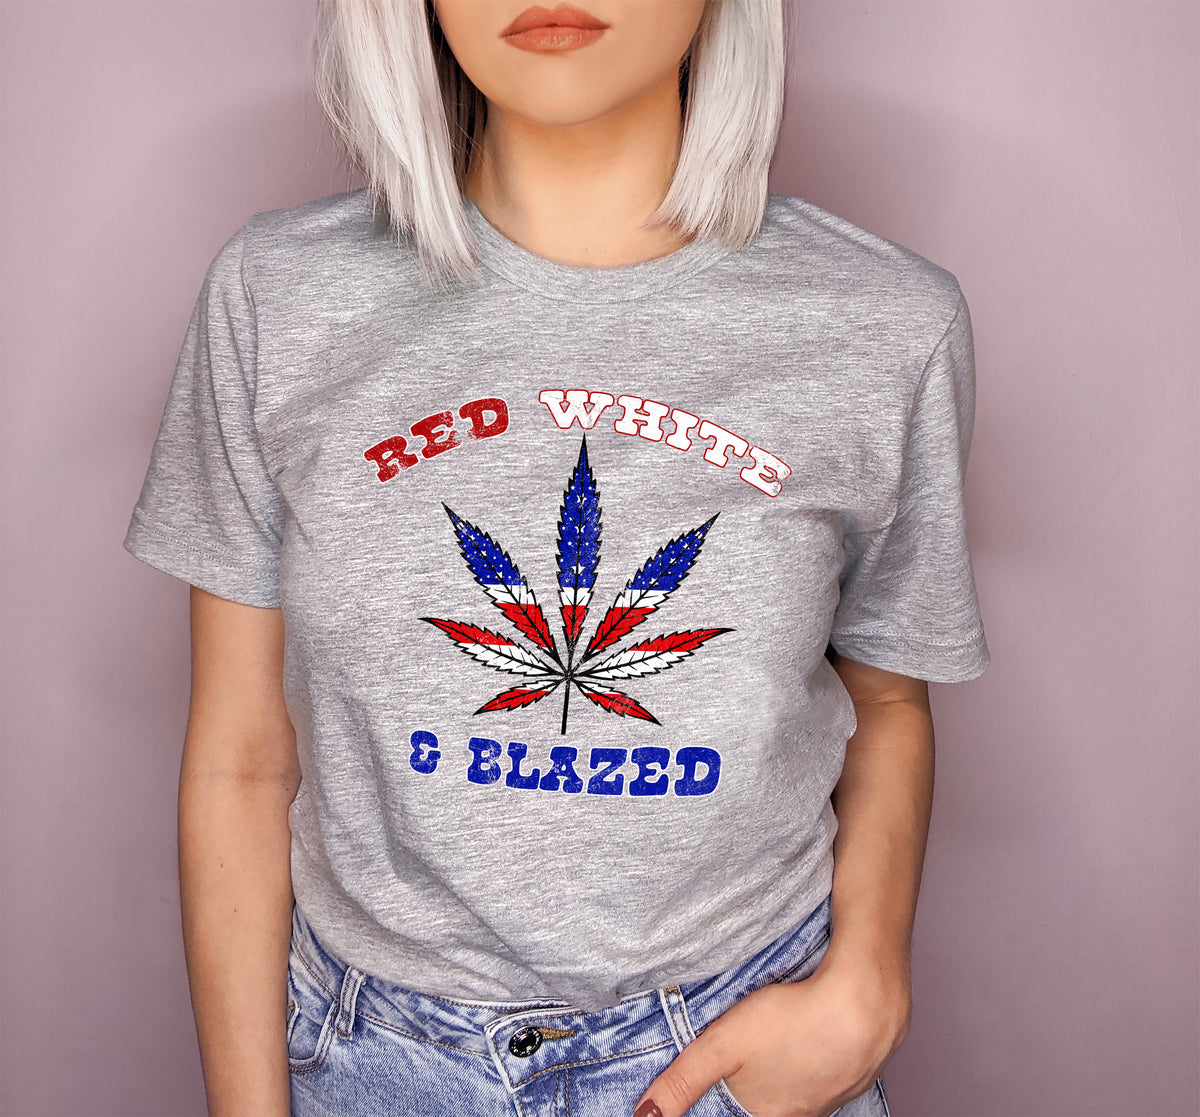 Grey shirt with a usa weed leaf that says red white and blazed - HighCiti